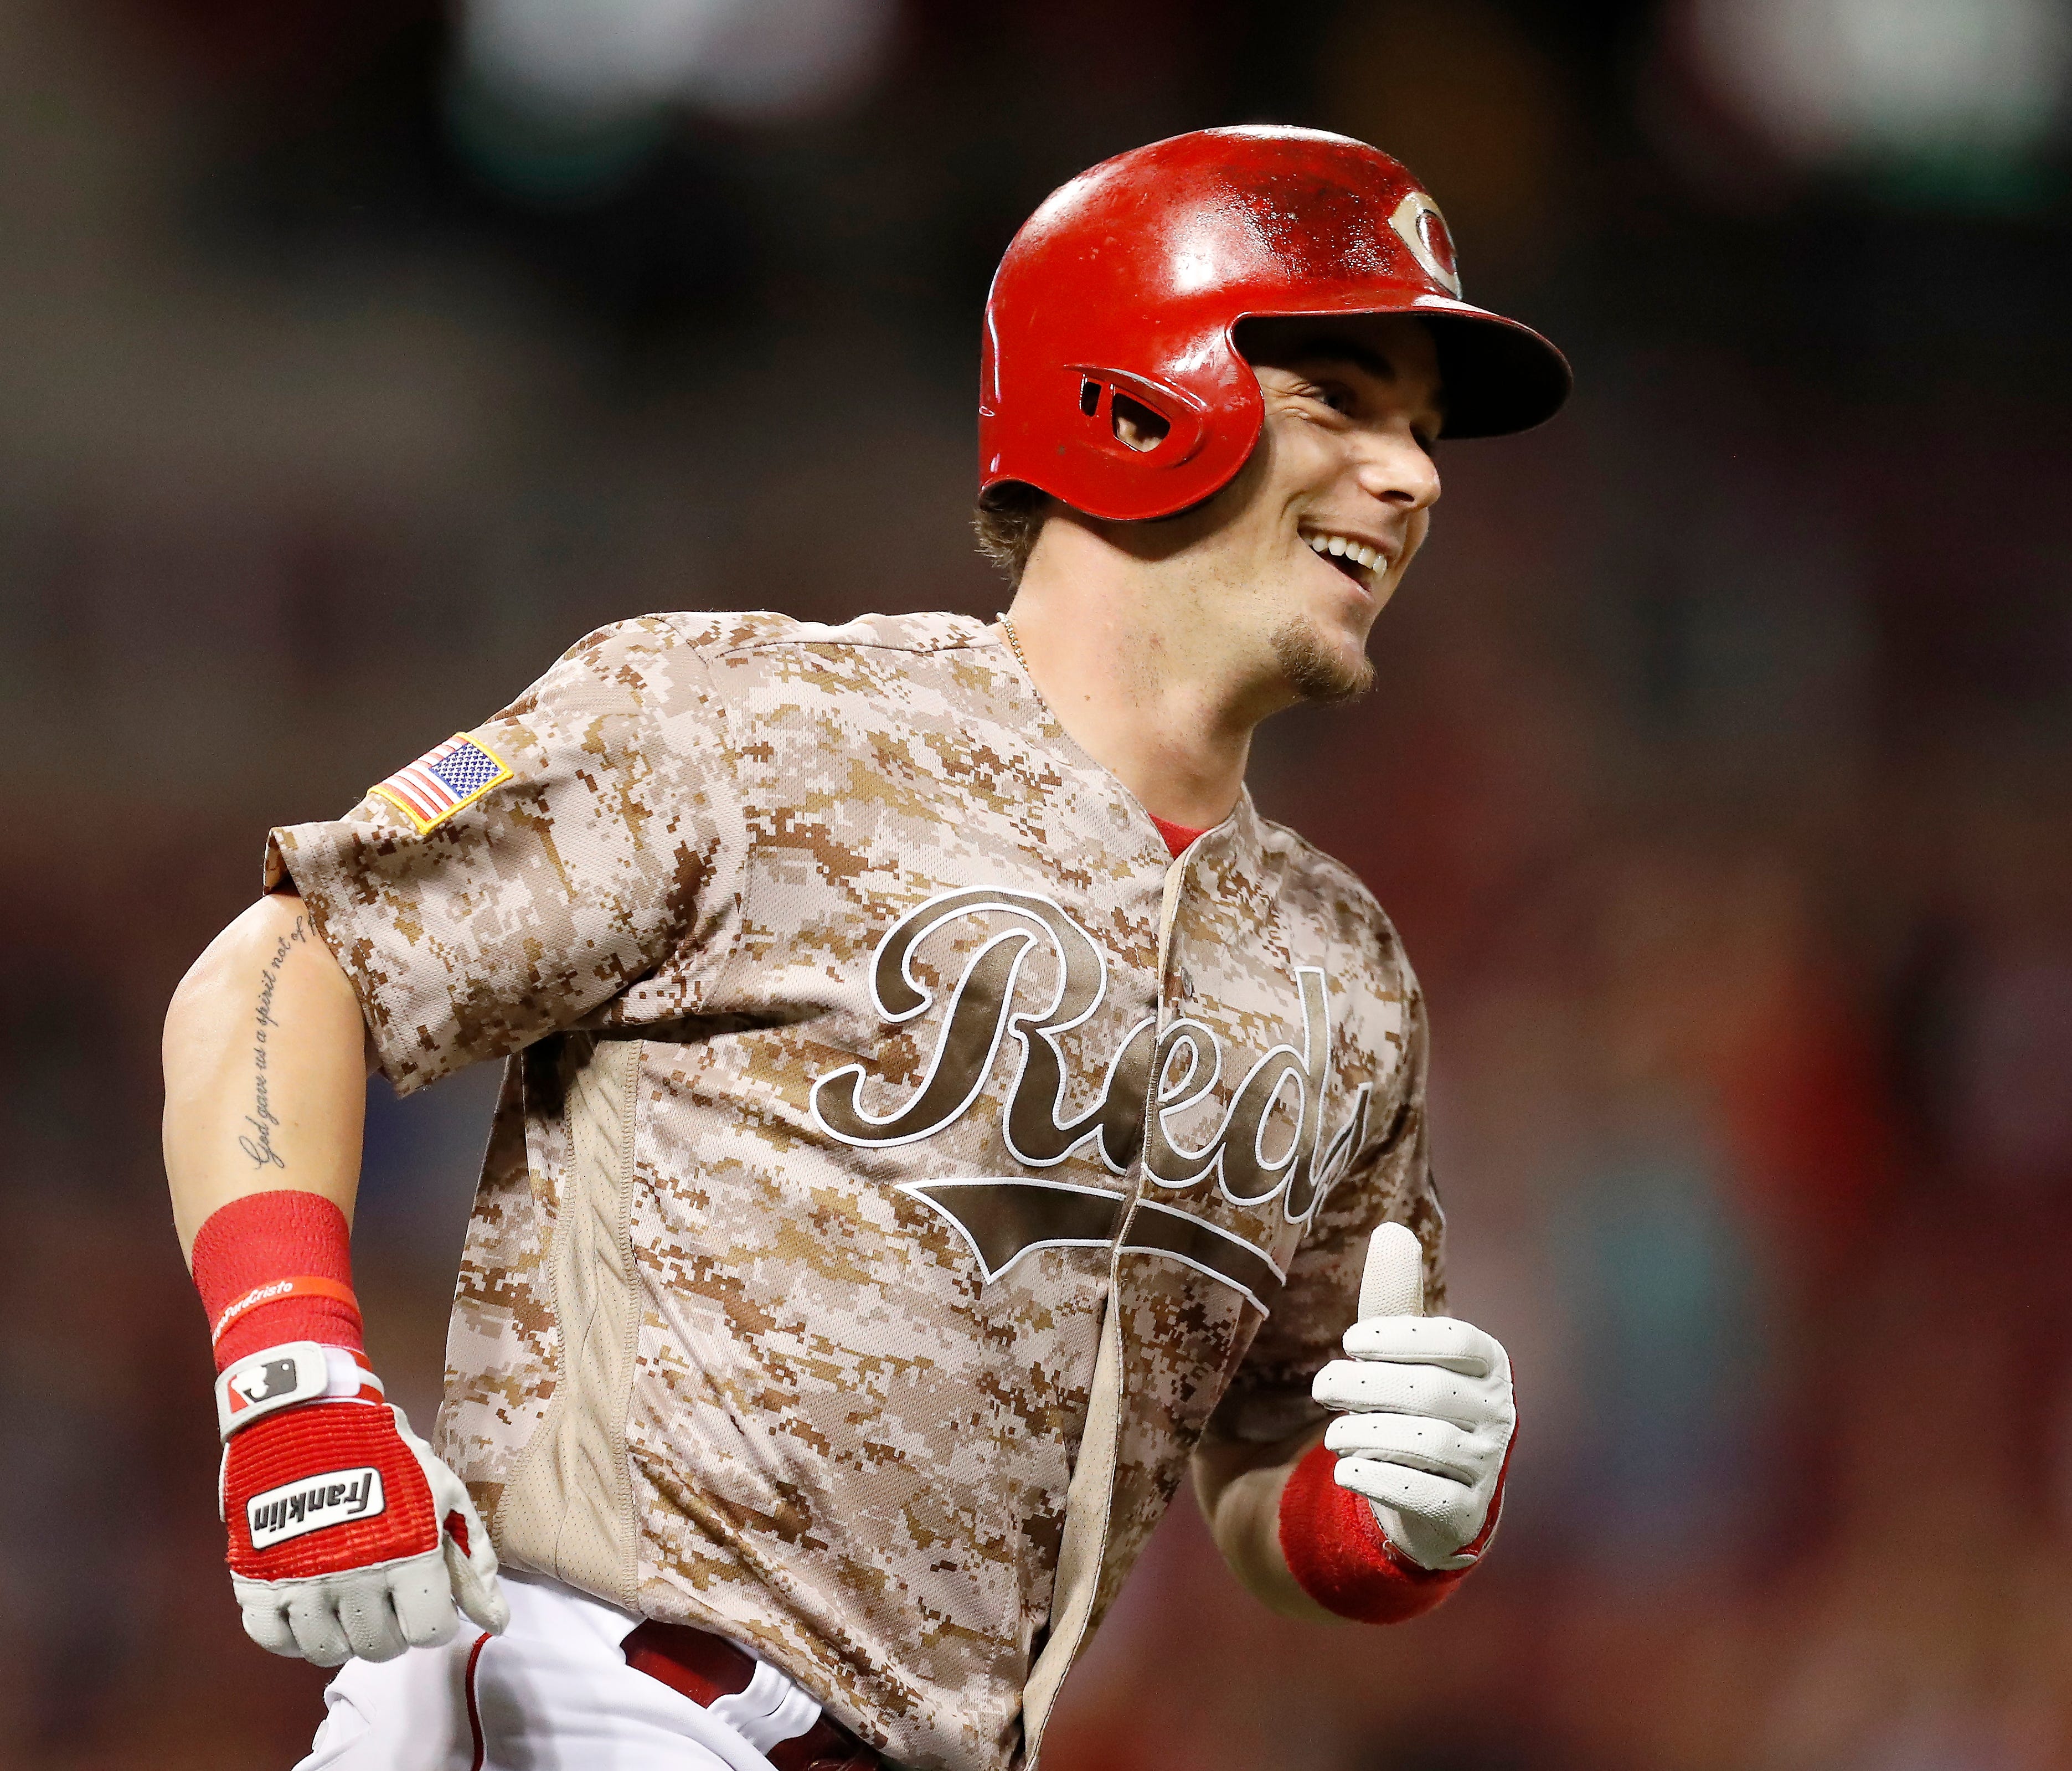 The biggest smile in baseball Tuesday belonged to Cincinnati Reds second baseman Scooter Gennett , here rounding the bases after his record-tying fourth home run.